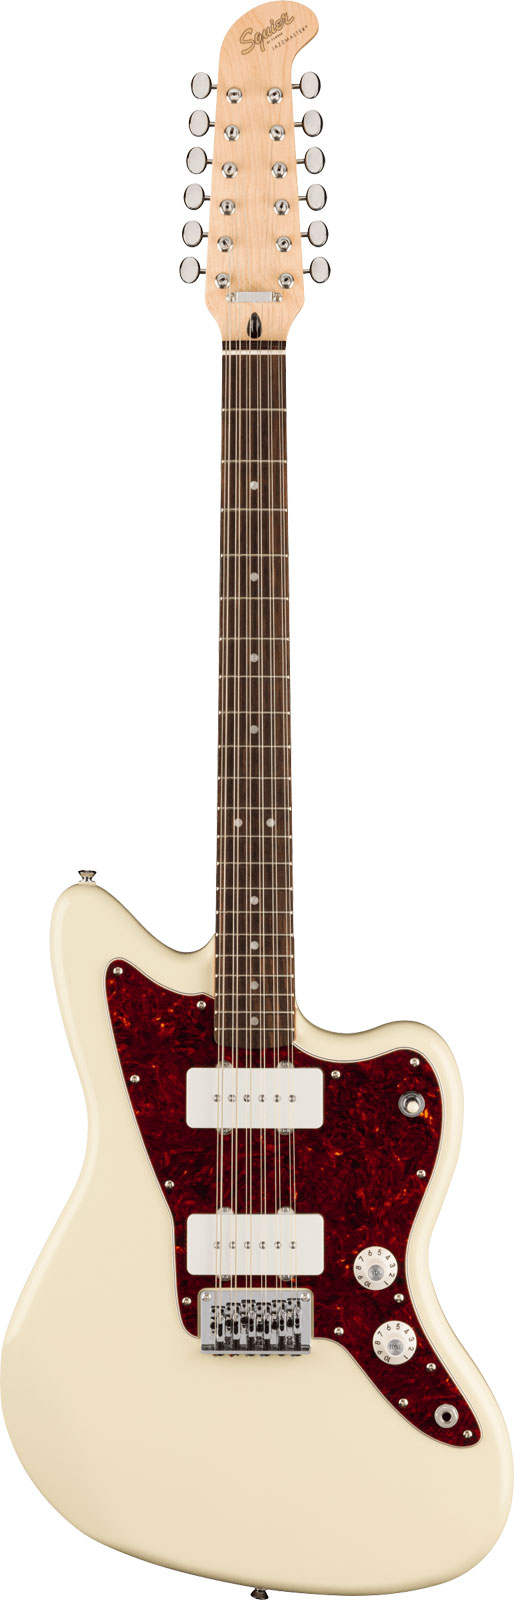 SQUIER JAZZMASTER XII PARANORMAL LRL TSPG OLW